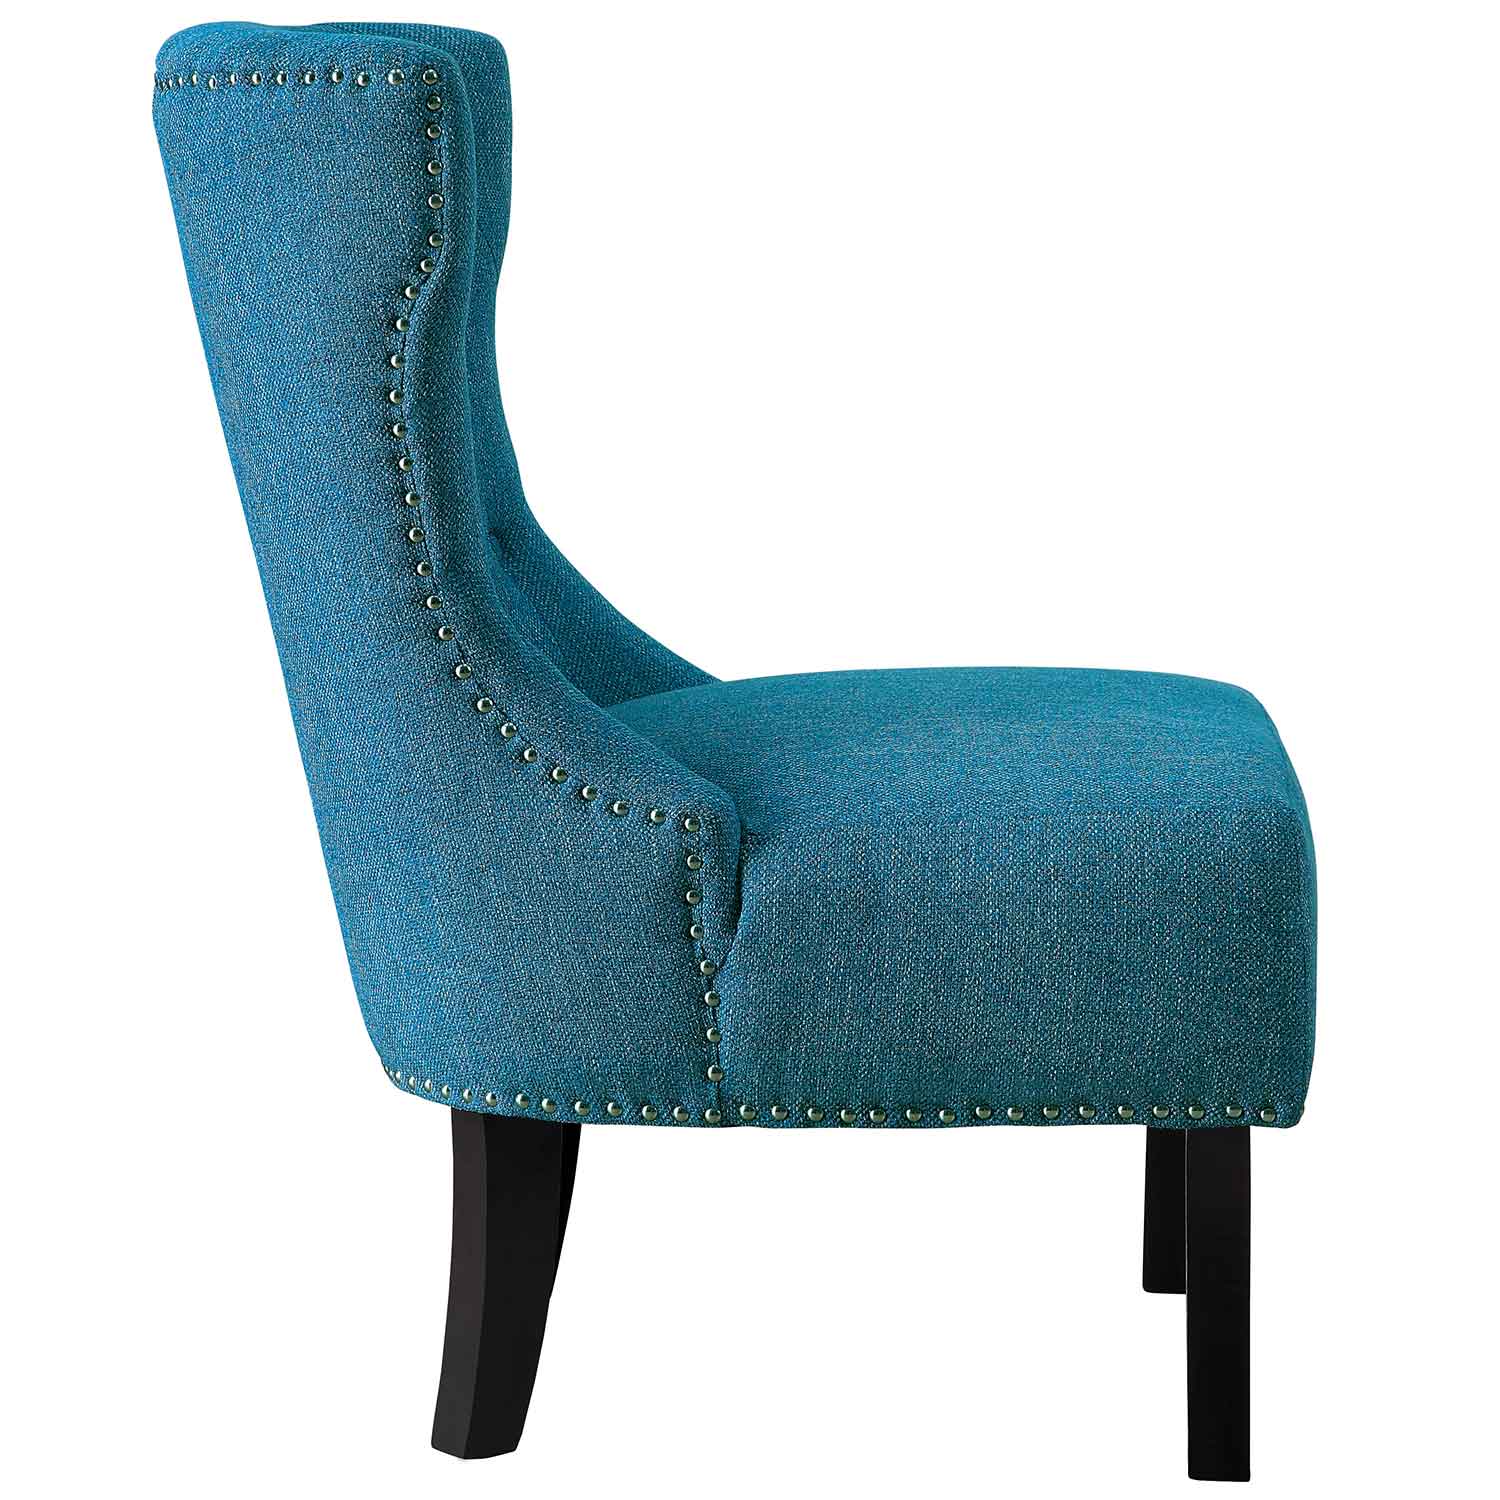 Homelegance Paighton Accent Chair - Blue